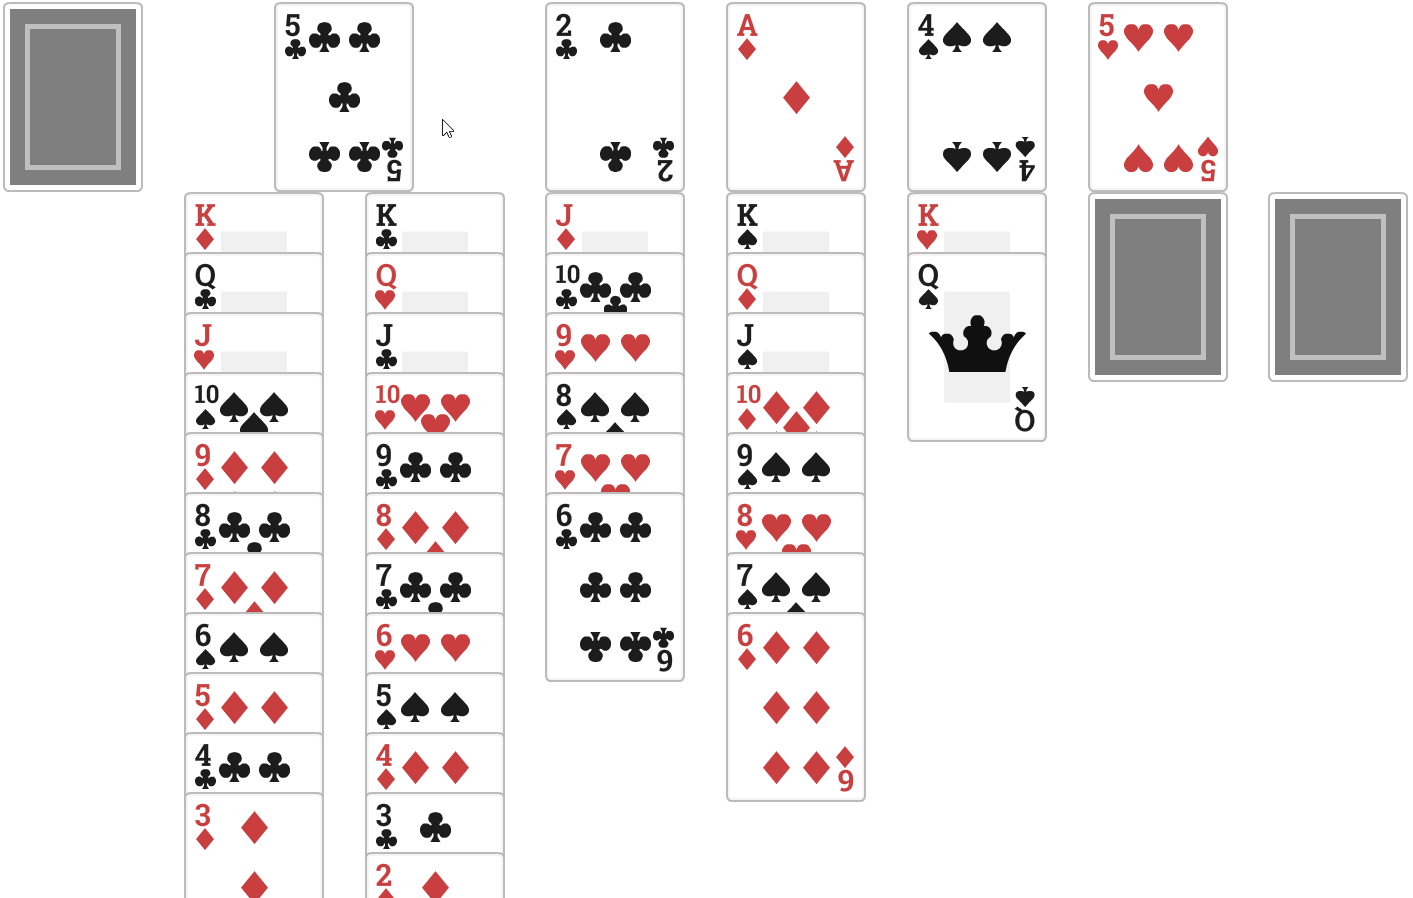 Solitaire in Blazor Part 5 - Double-Click Shortcut and Autocomplete